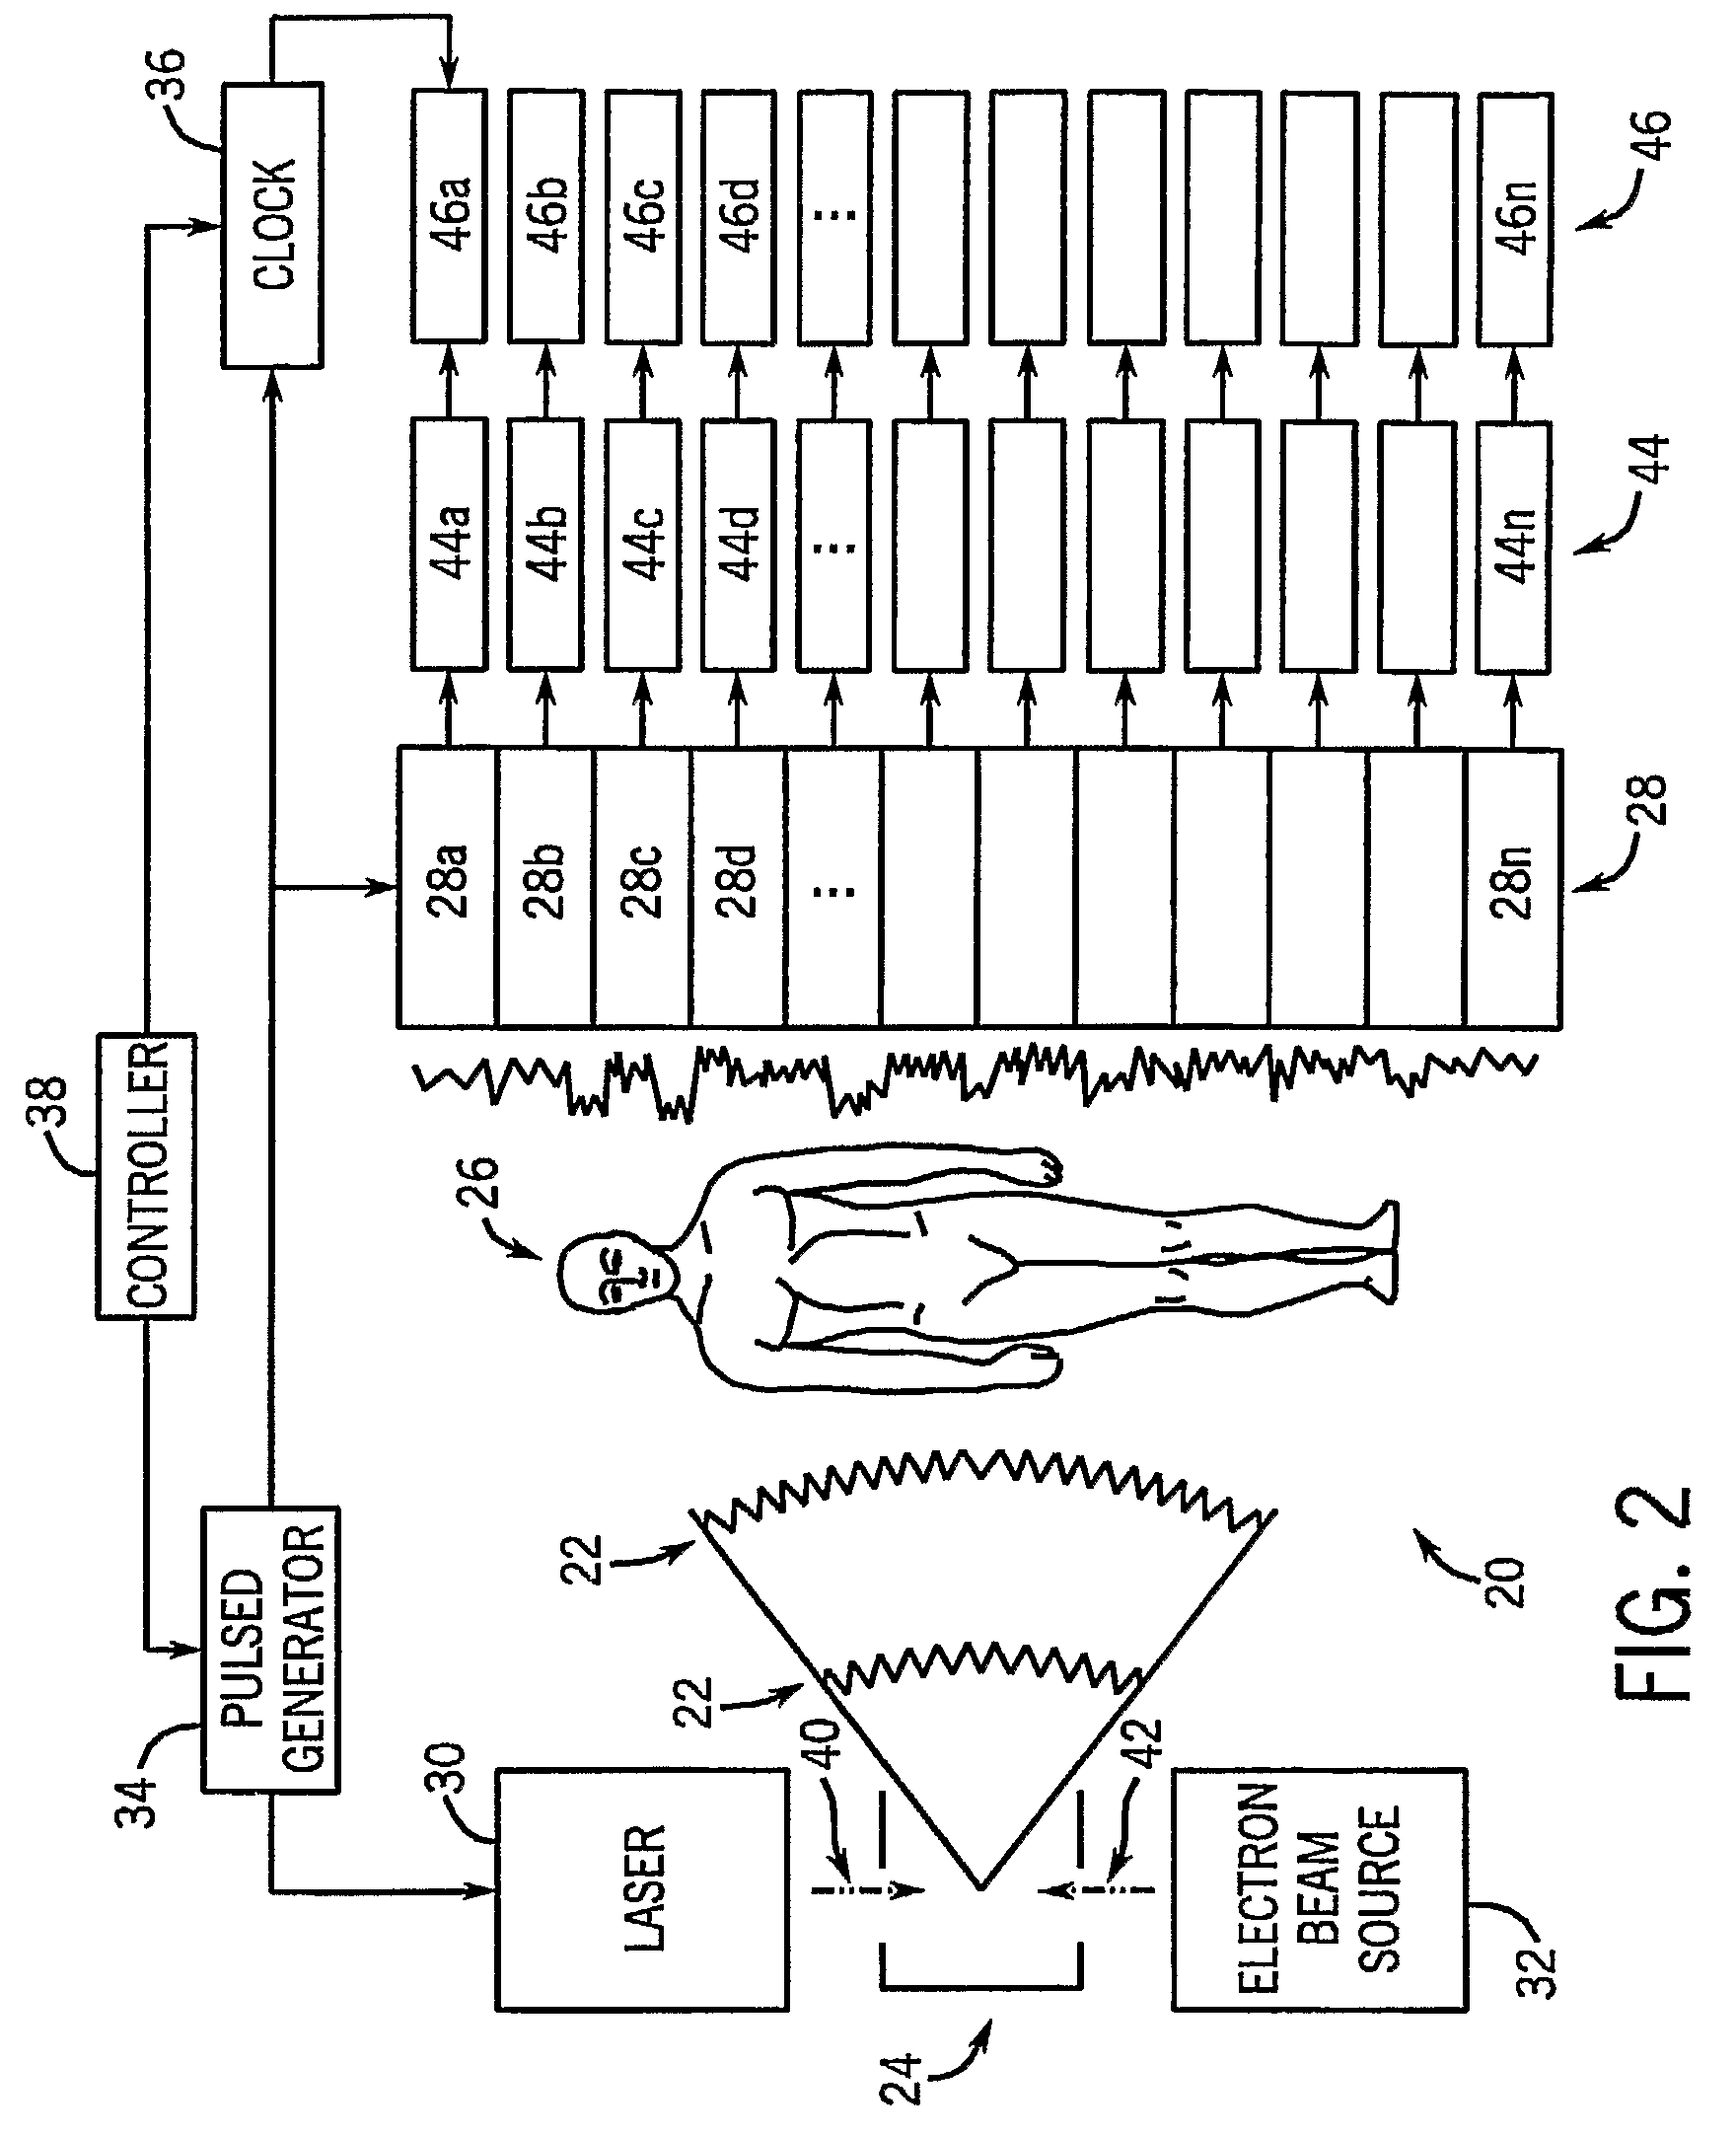 System and method for time-of-flight imaging